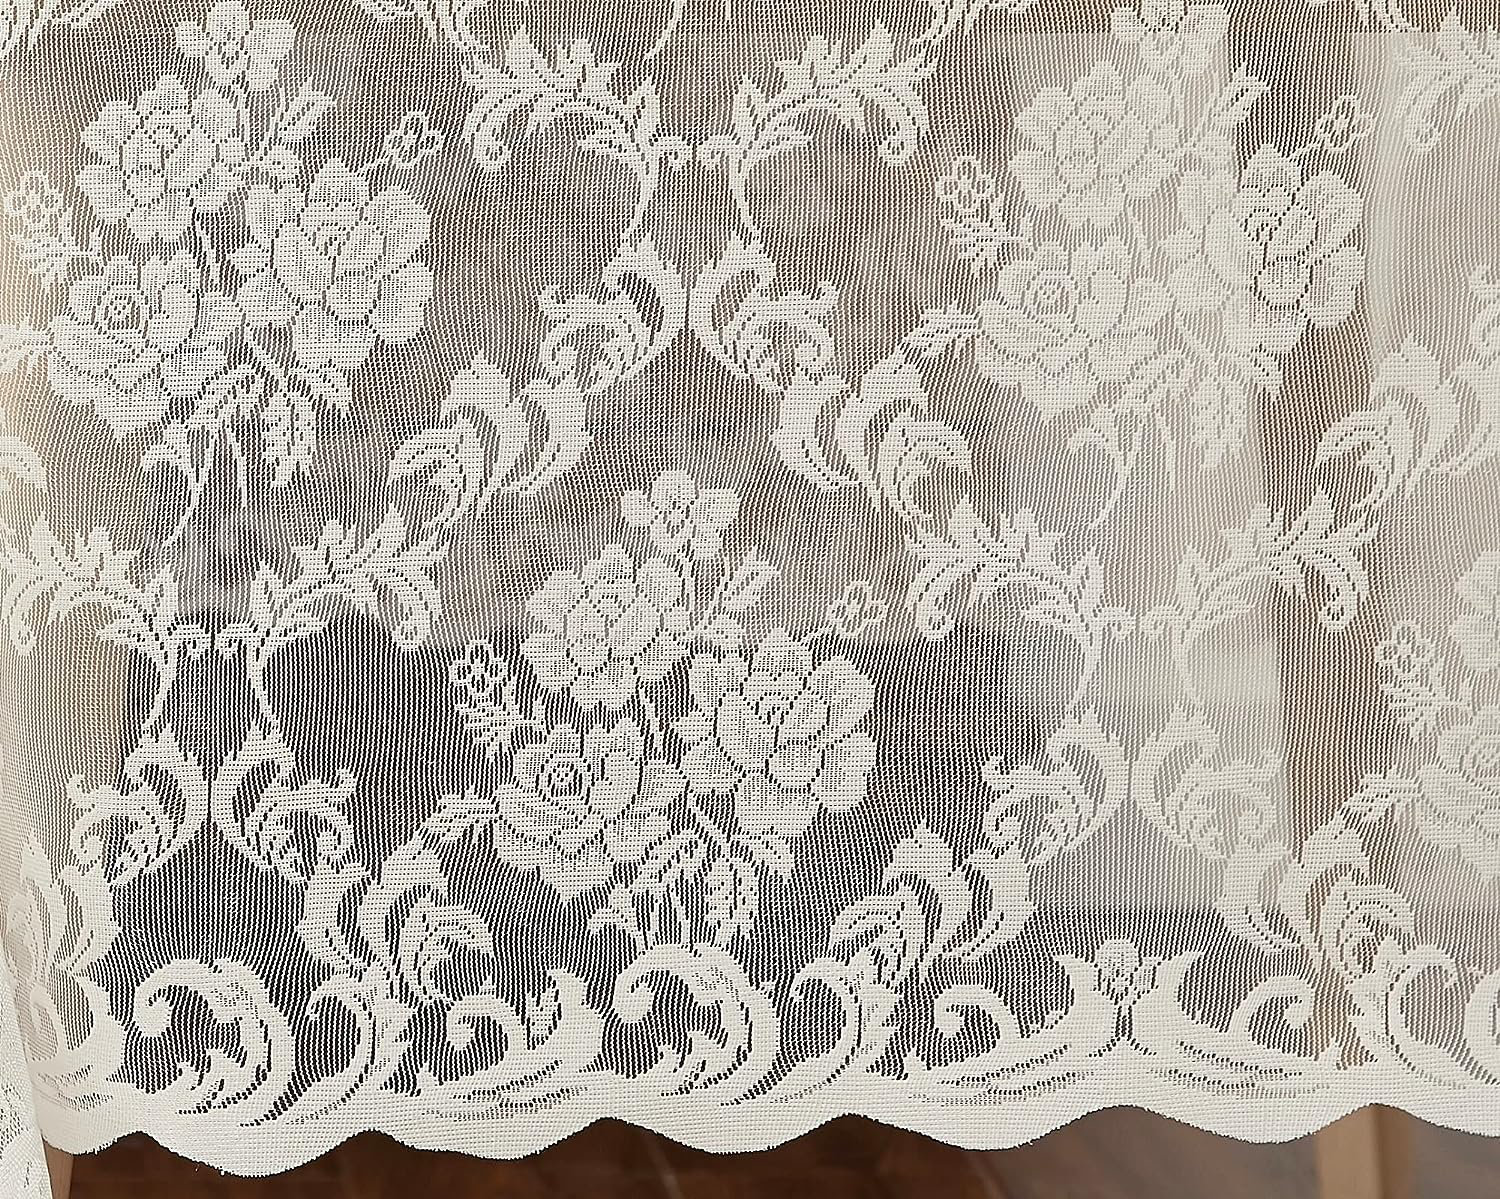 5 Yards Long Lace Fabric in 4 Colors. 60 Inches Wide Warm Home Designs Color: Black